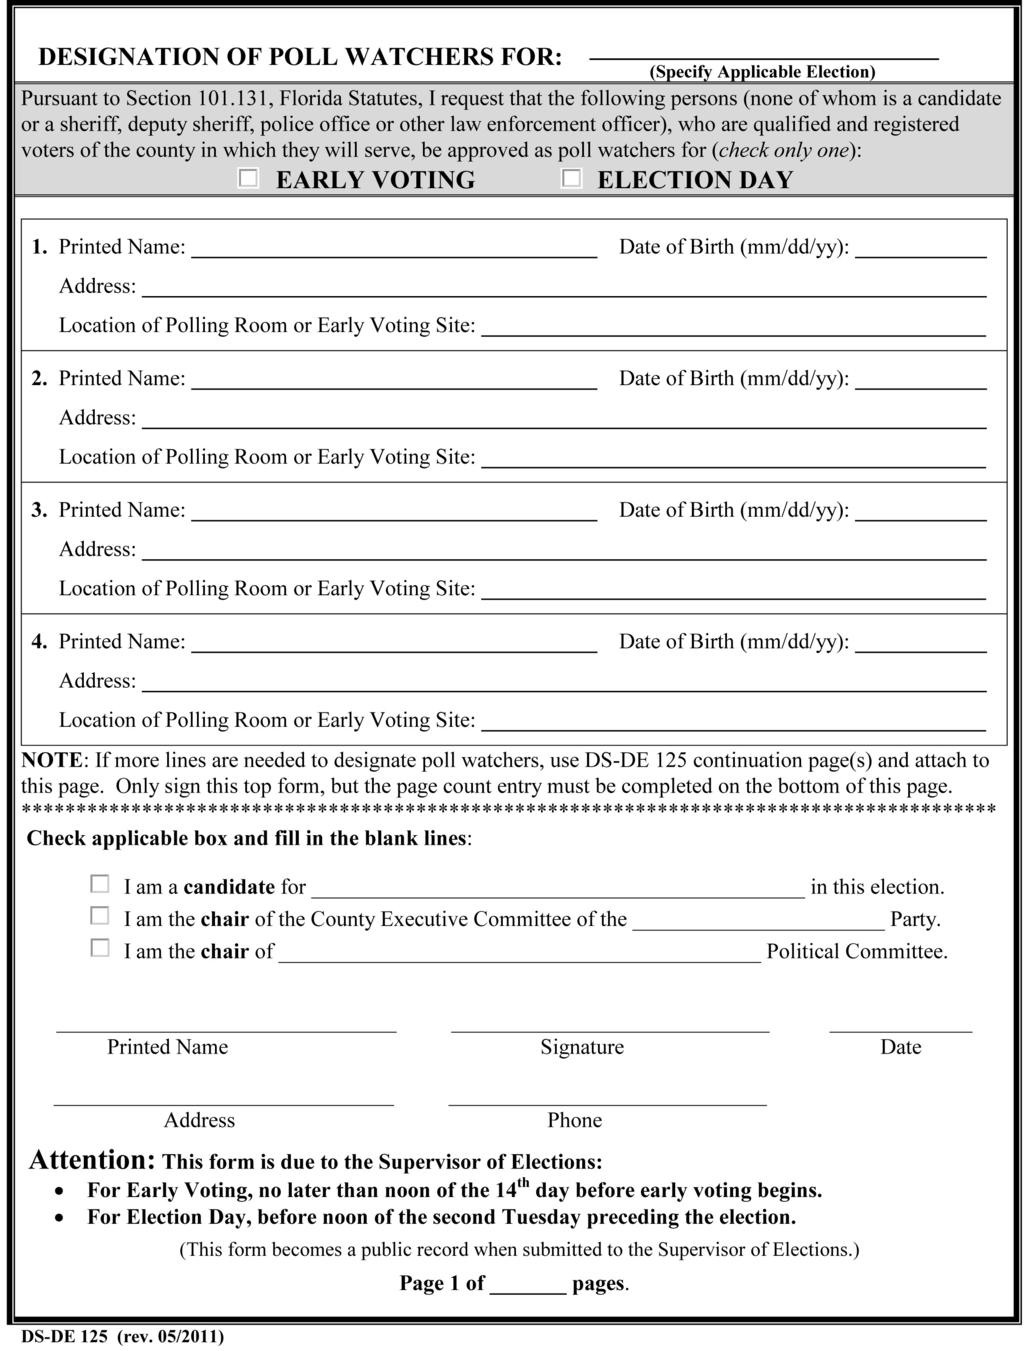 This form can be found at VotePinellas.